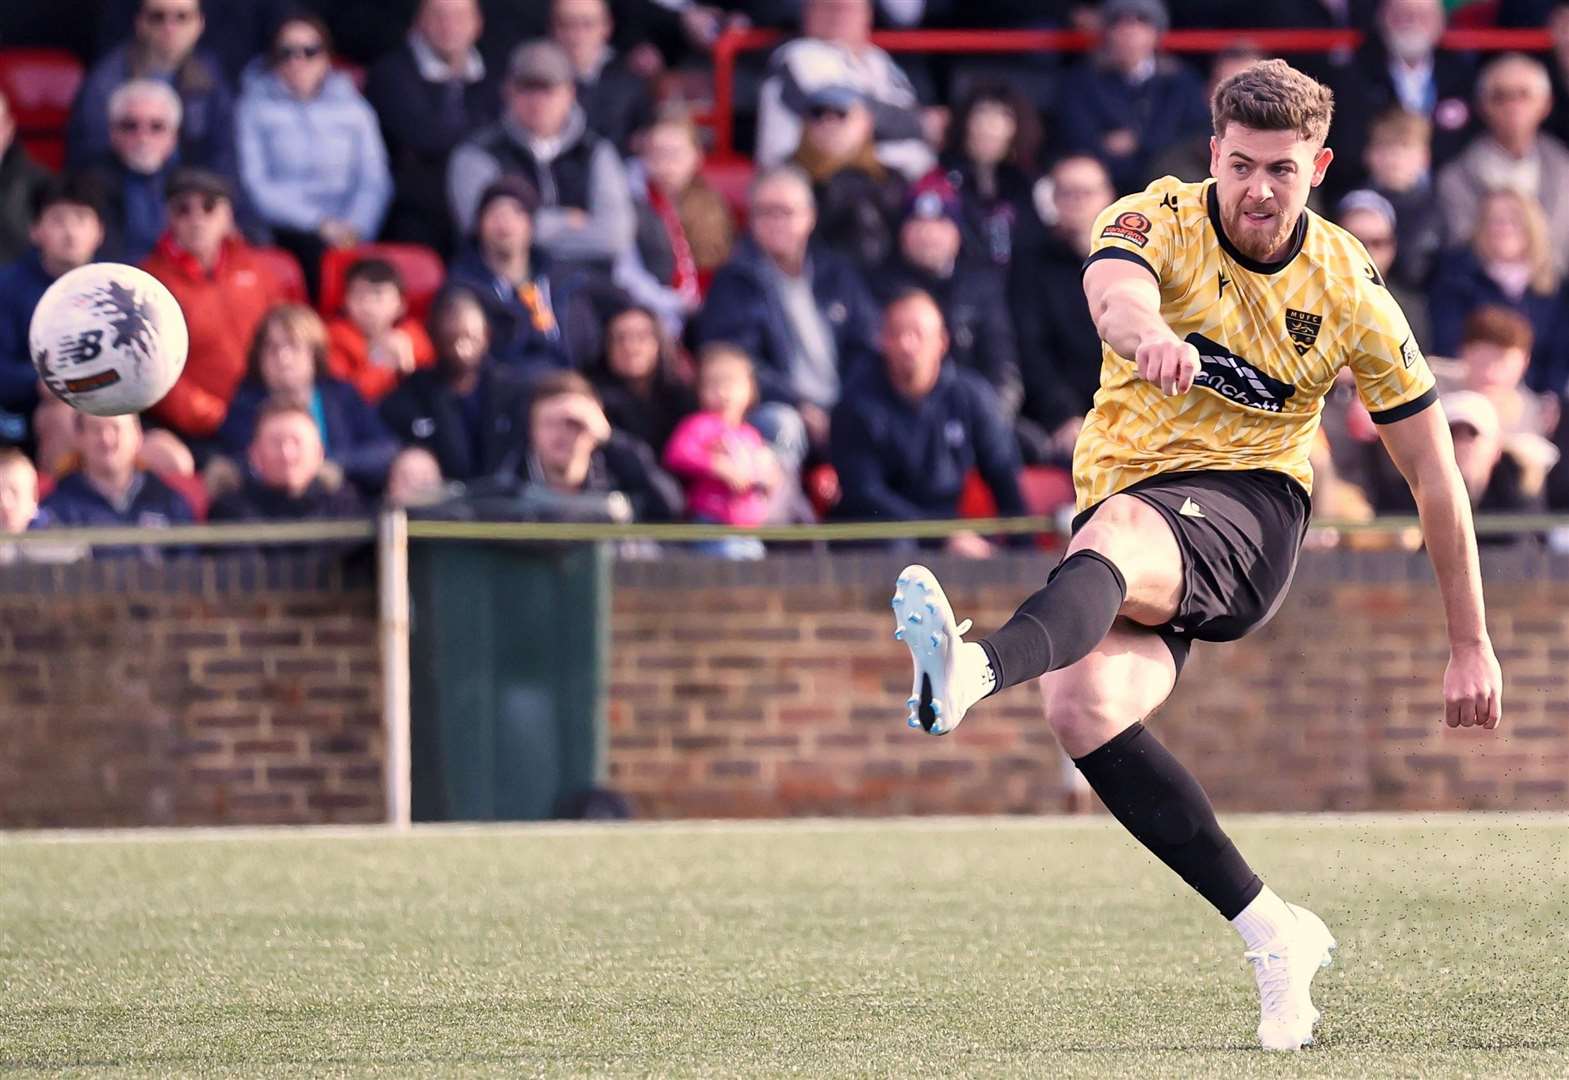 Maidstone midfielder Sam Bone goes for goal on his return from injury. Picture: Helen Cooper